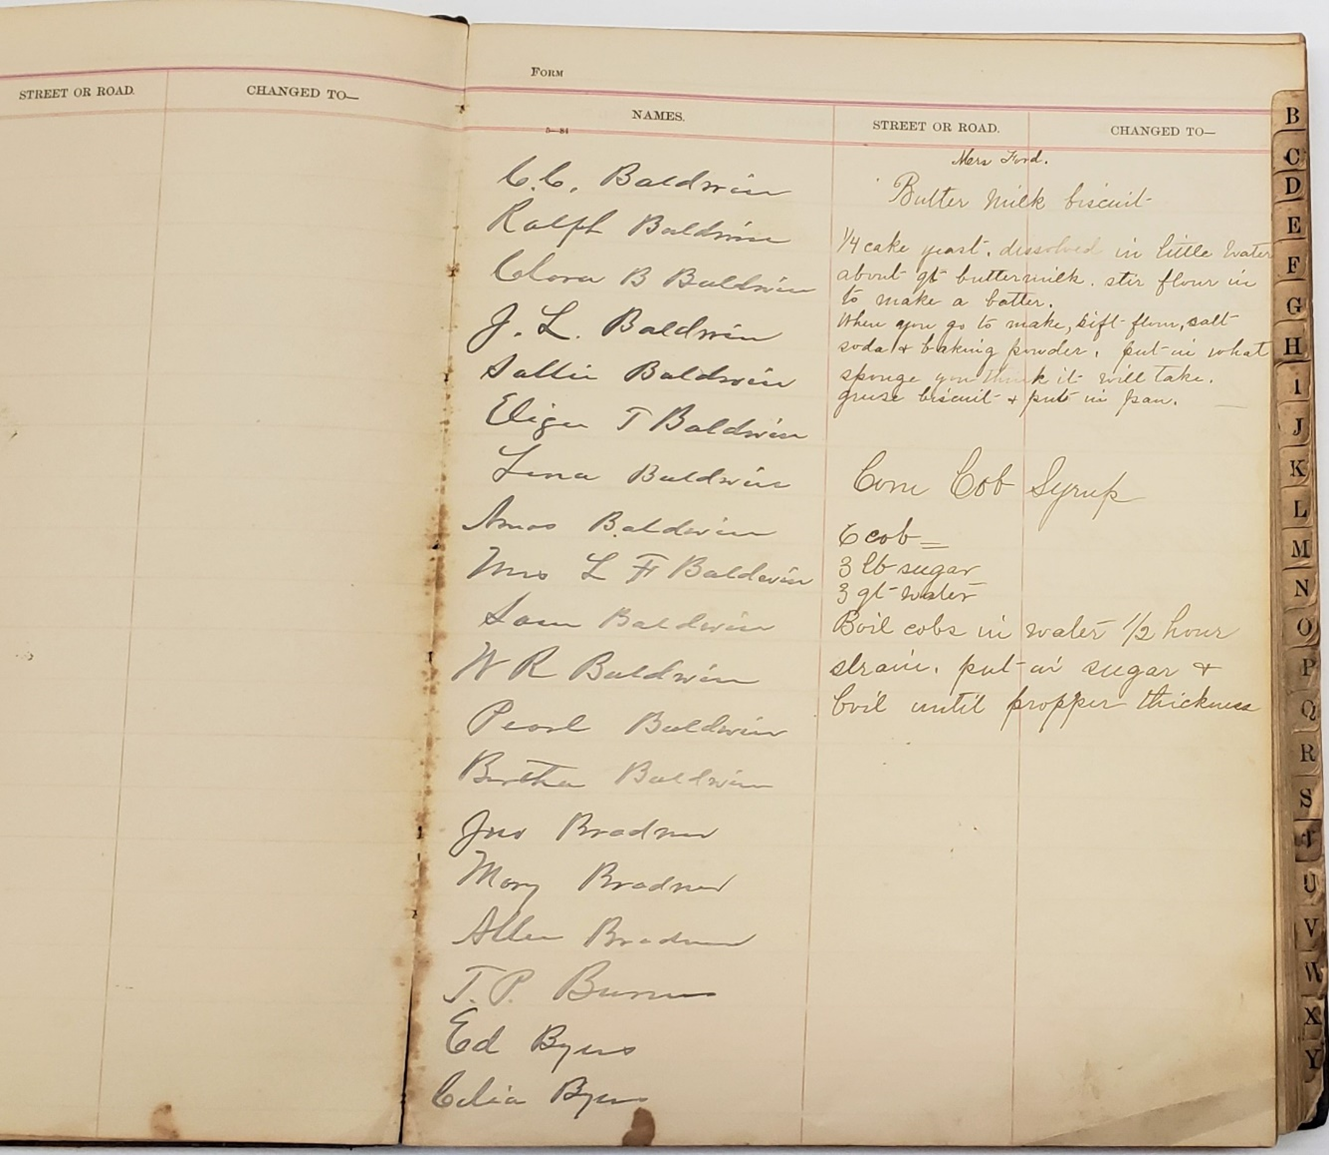 Inside of opened cash book with detailed handwritten records